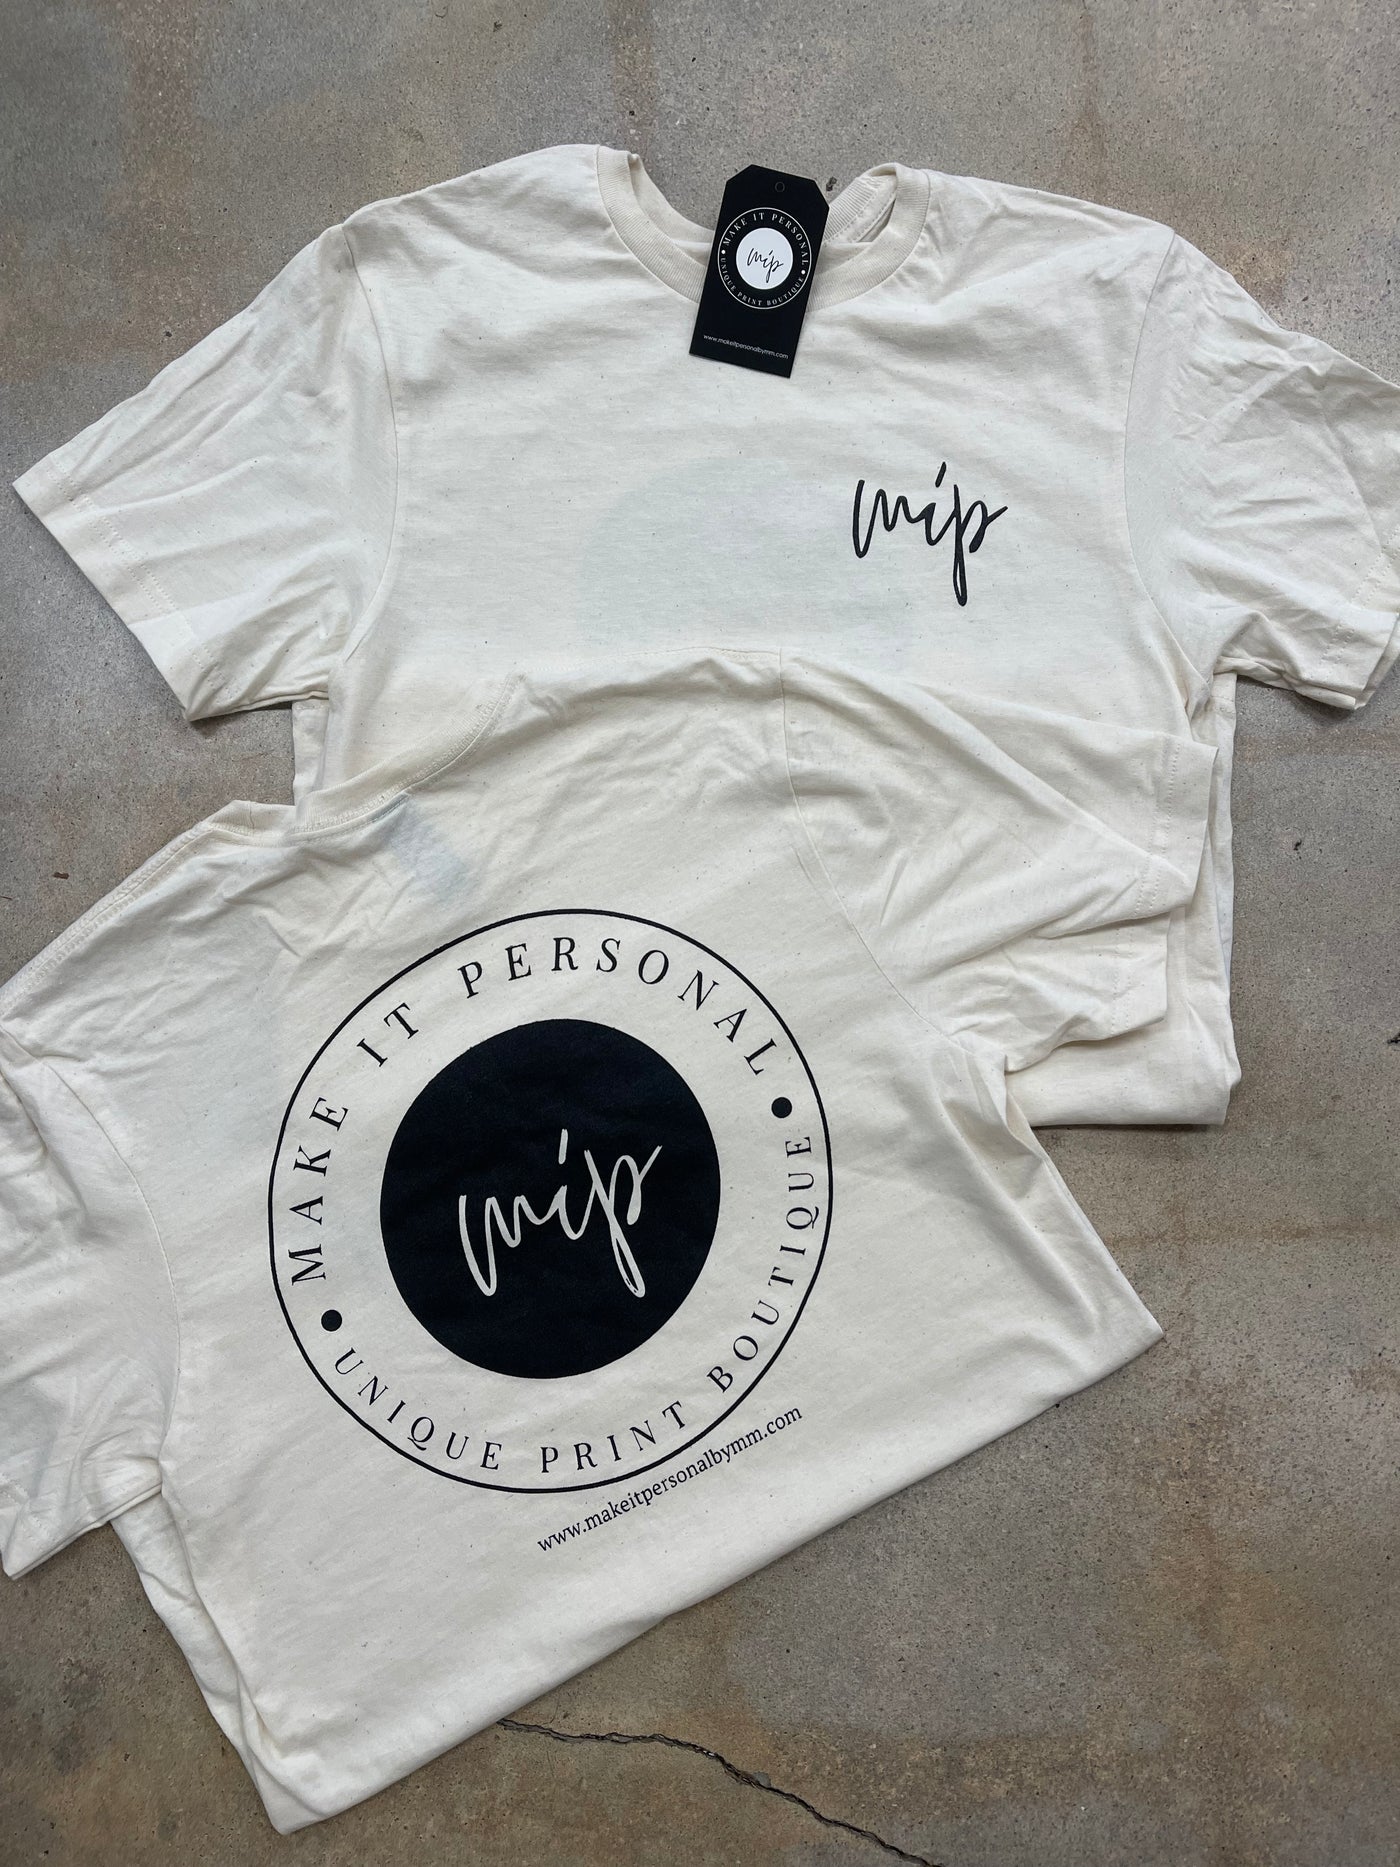 Make it Personal Tee